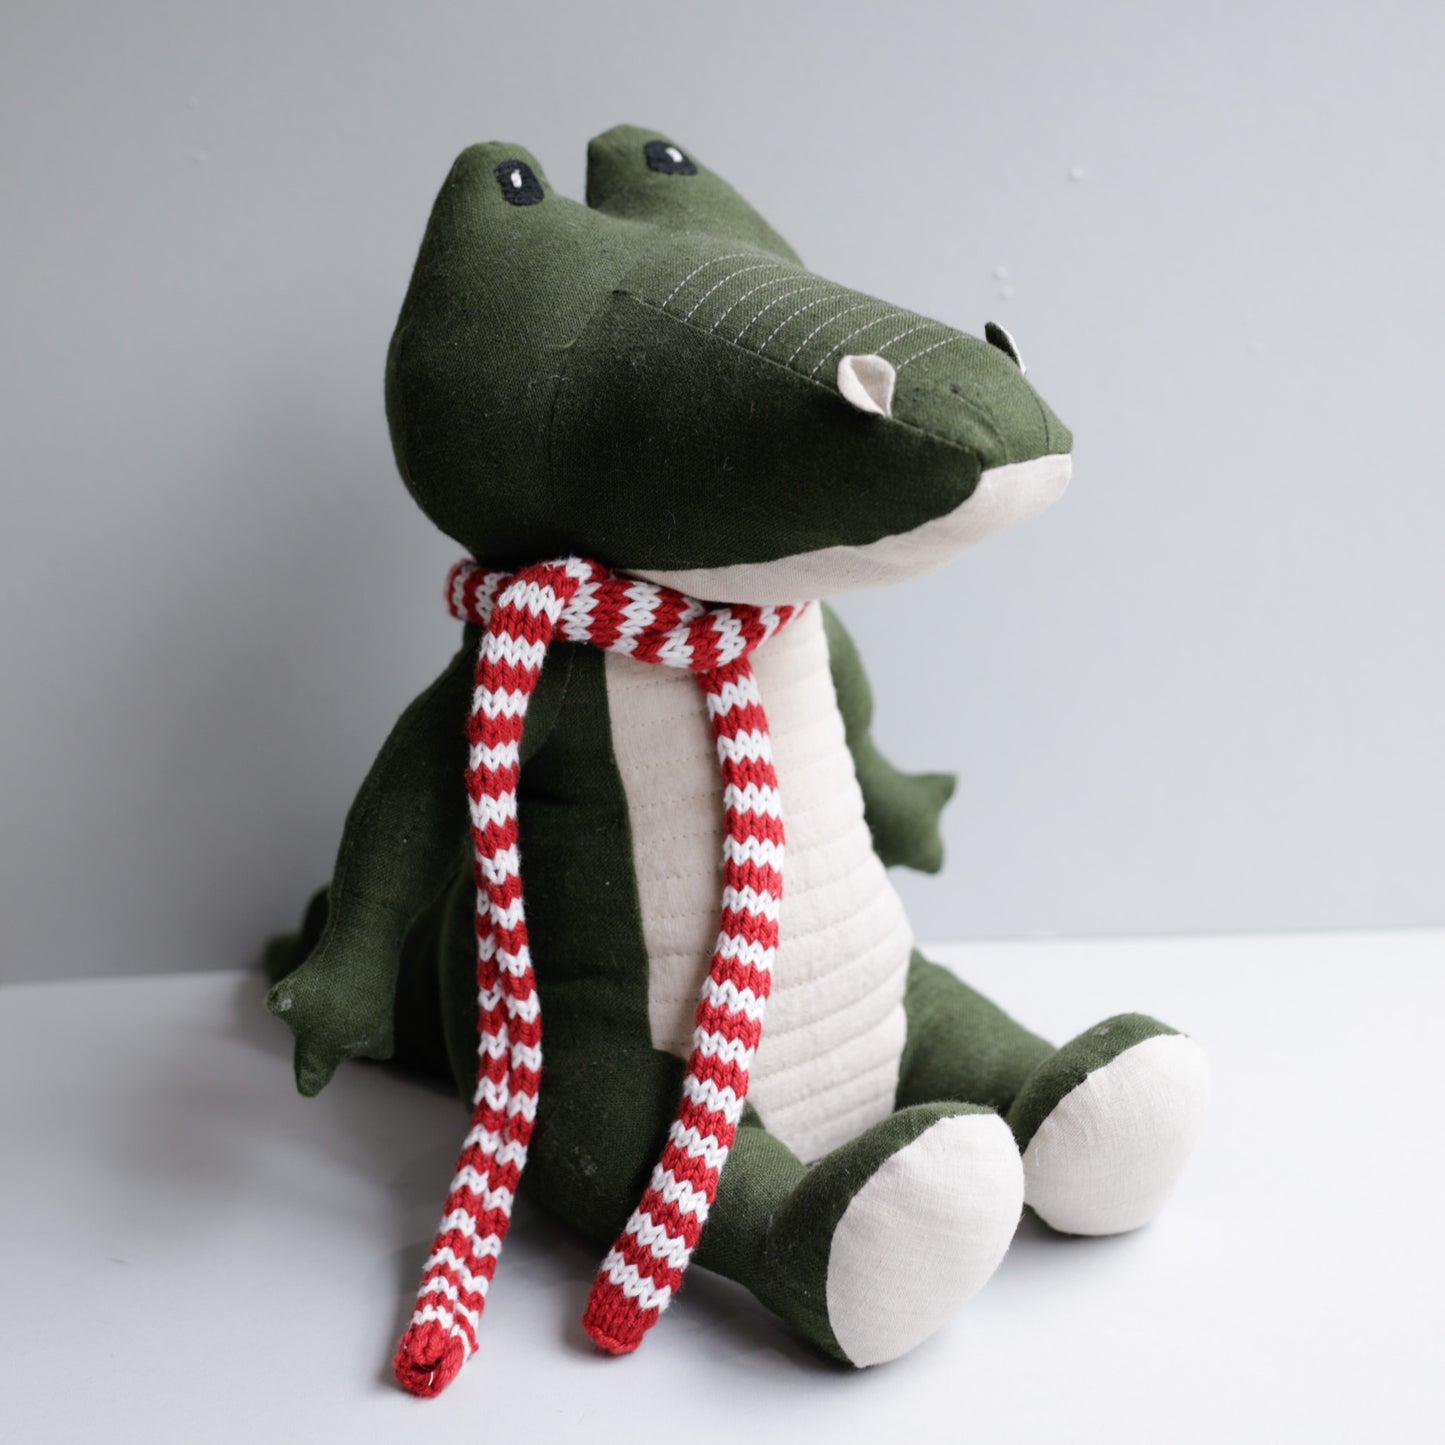 100% natural linen fabric Alligator toy